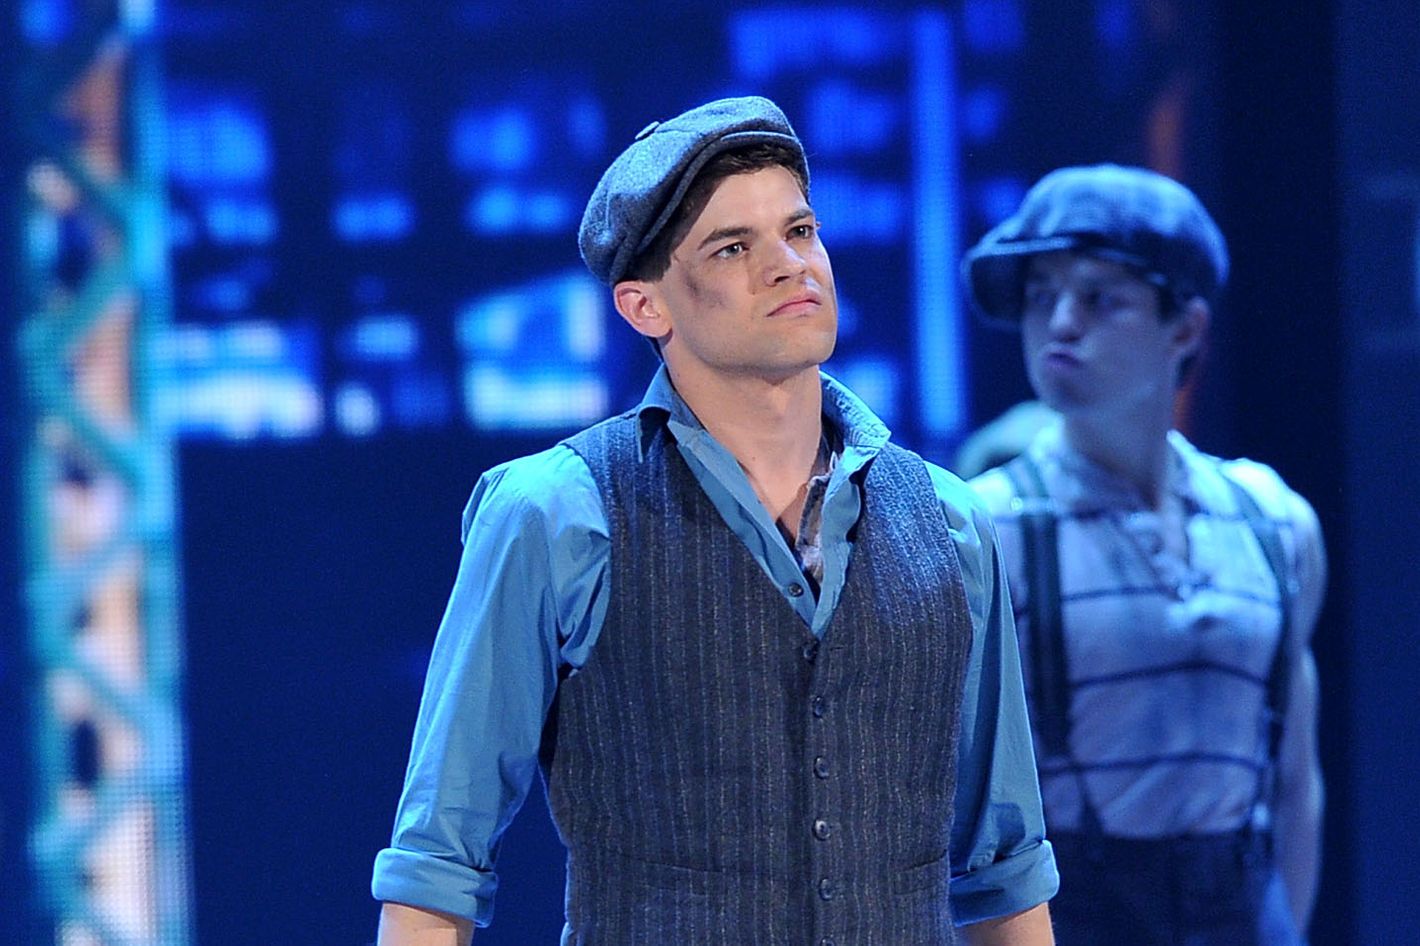 A Taped Performance Of Newsies Led By Original Cast Member Jeremy Jordan Is Carrying The Banner Straight To A Movie Theater Near You